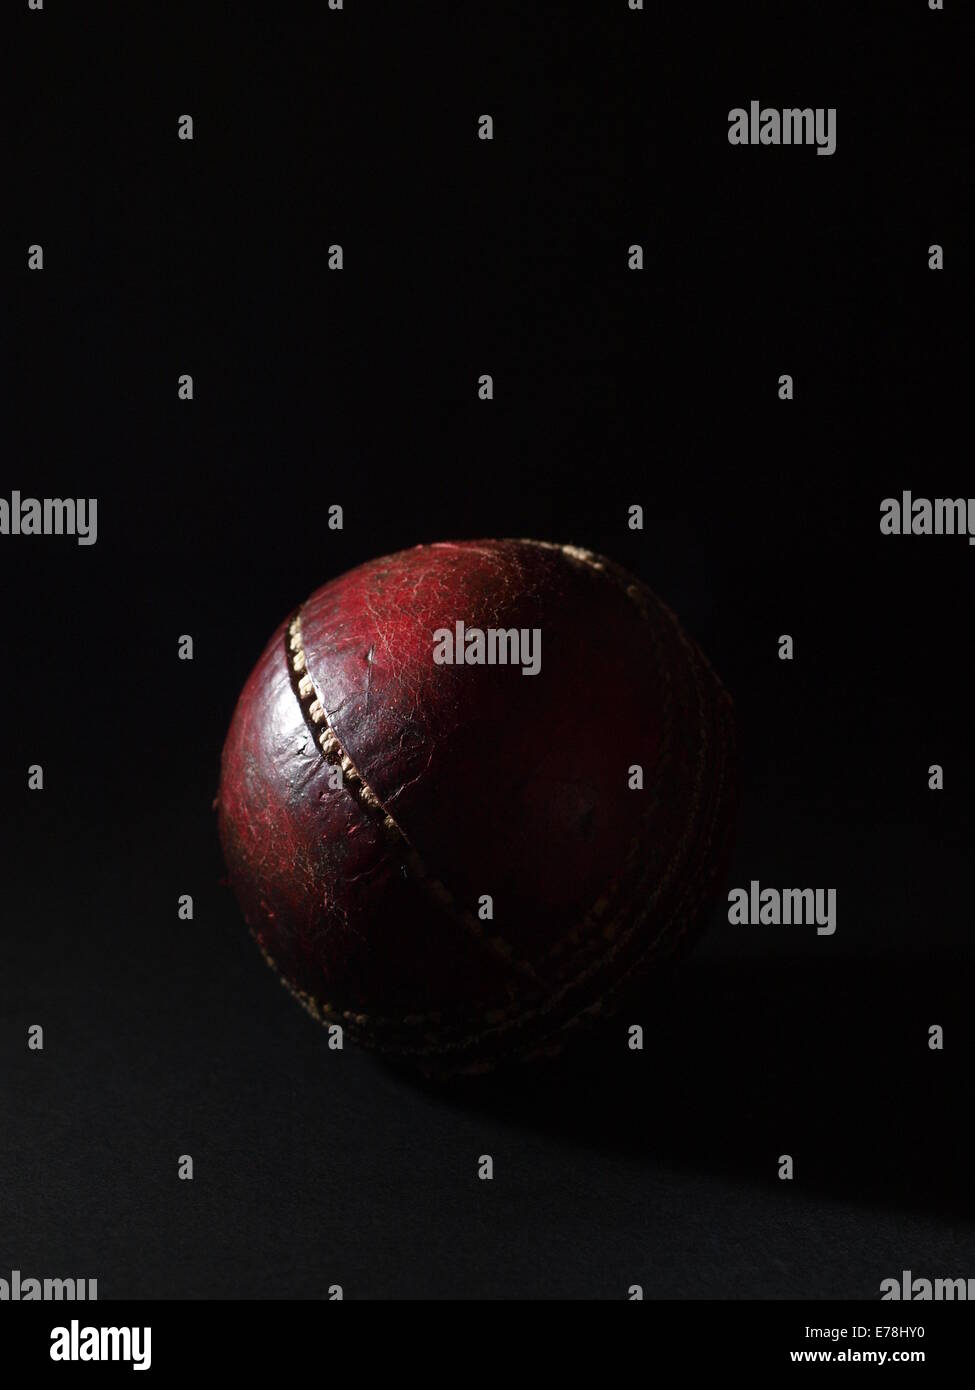 Old, red leather cricket ball with stitching coming apart on black background Stock Photo